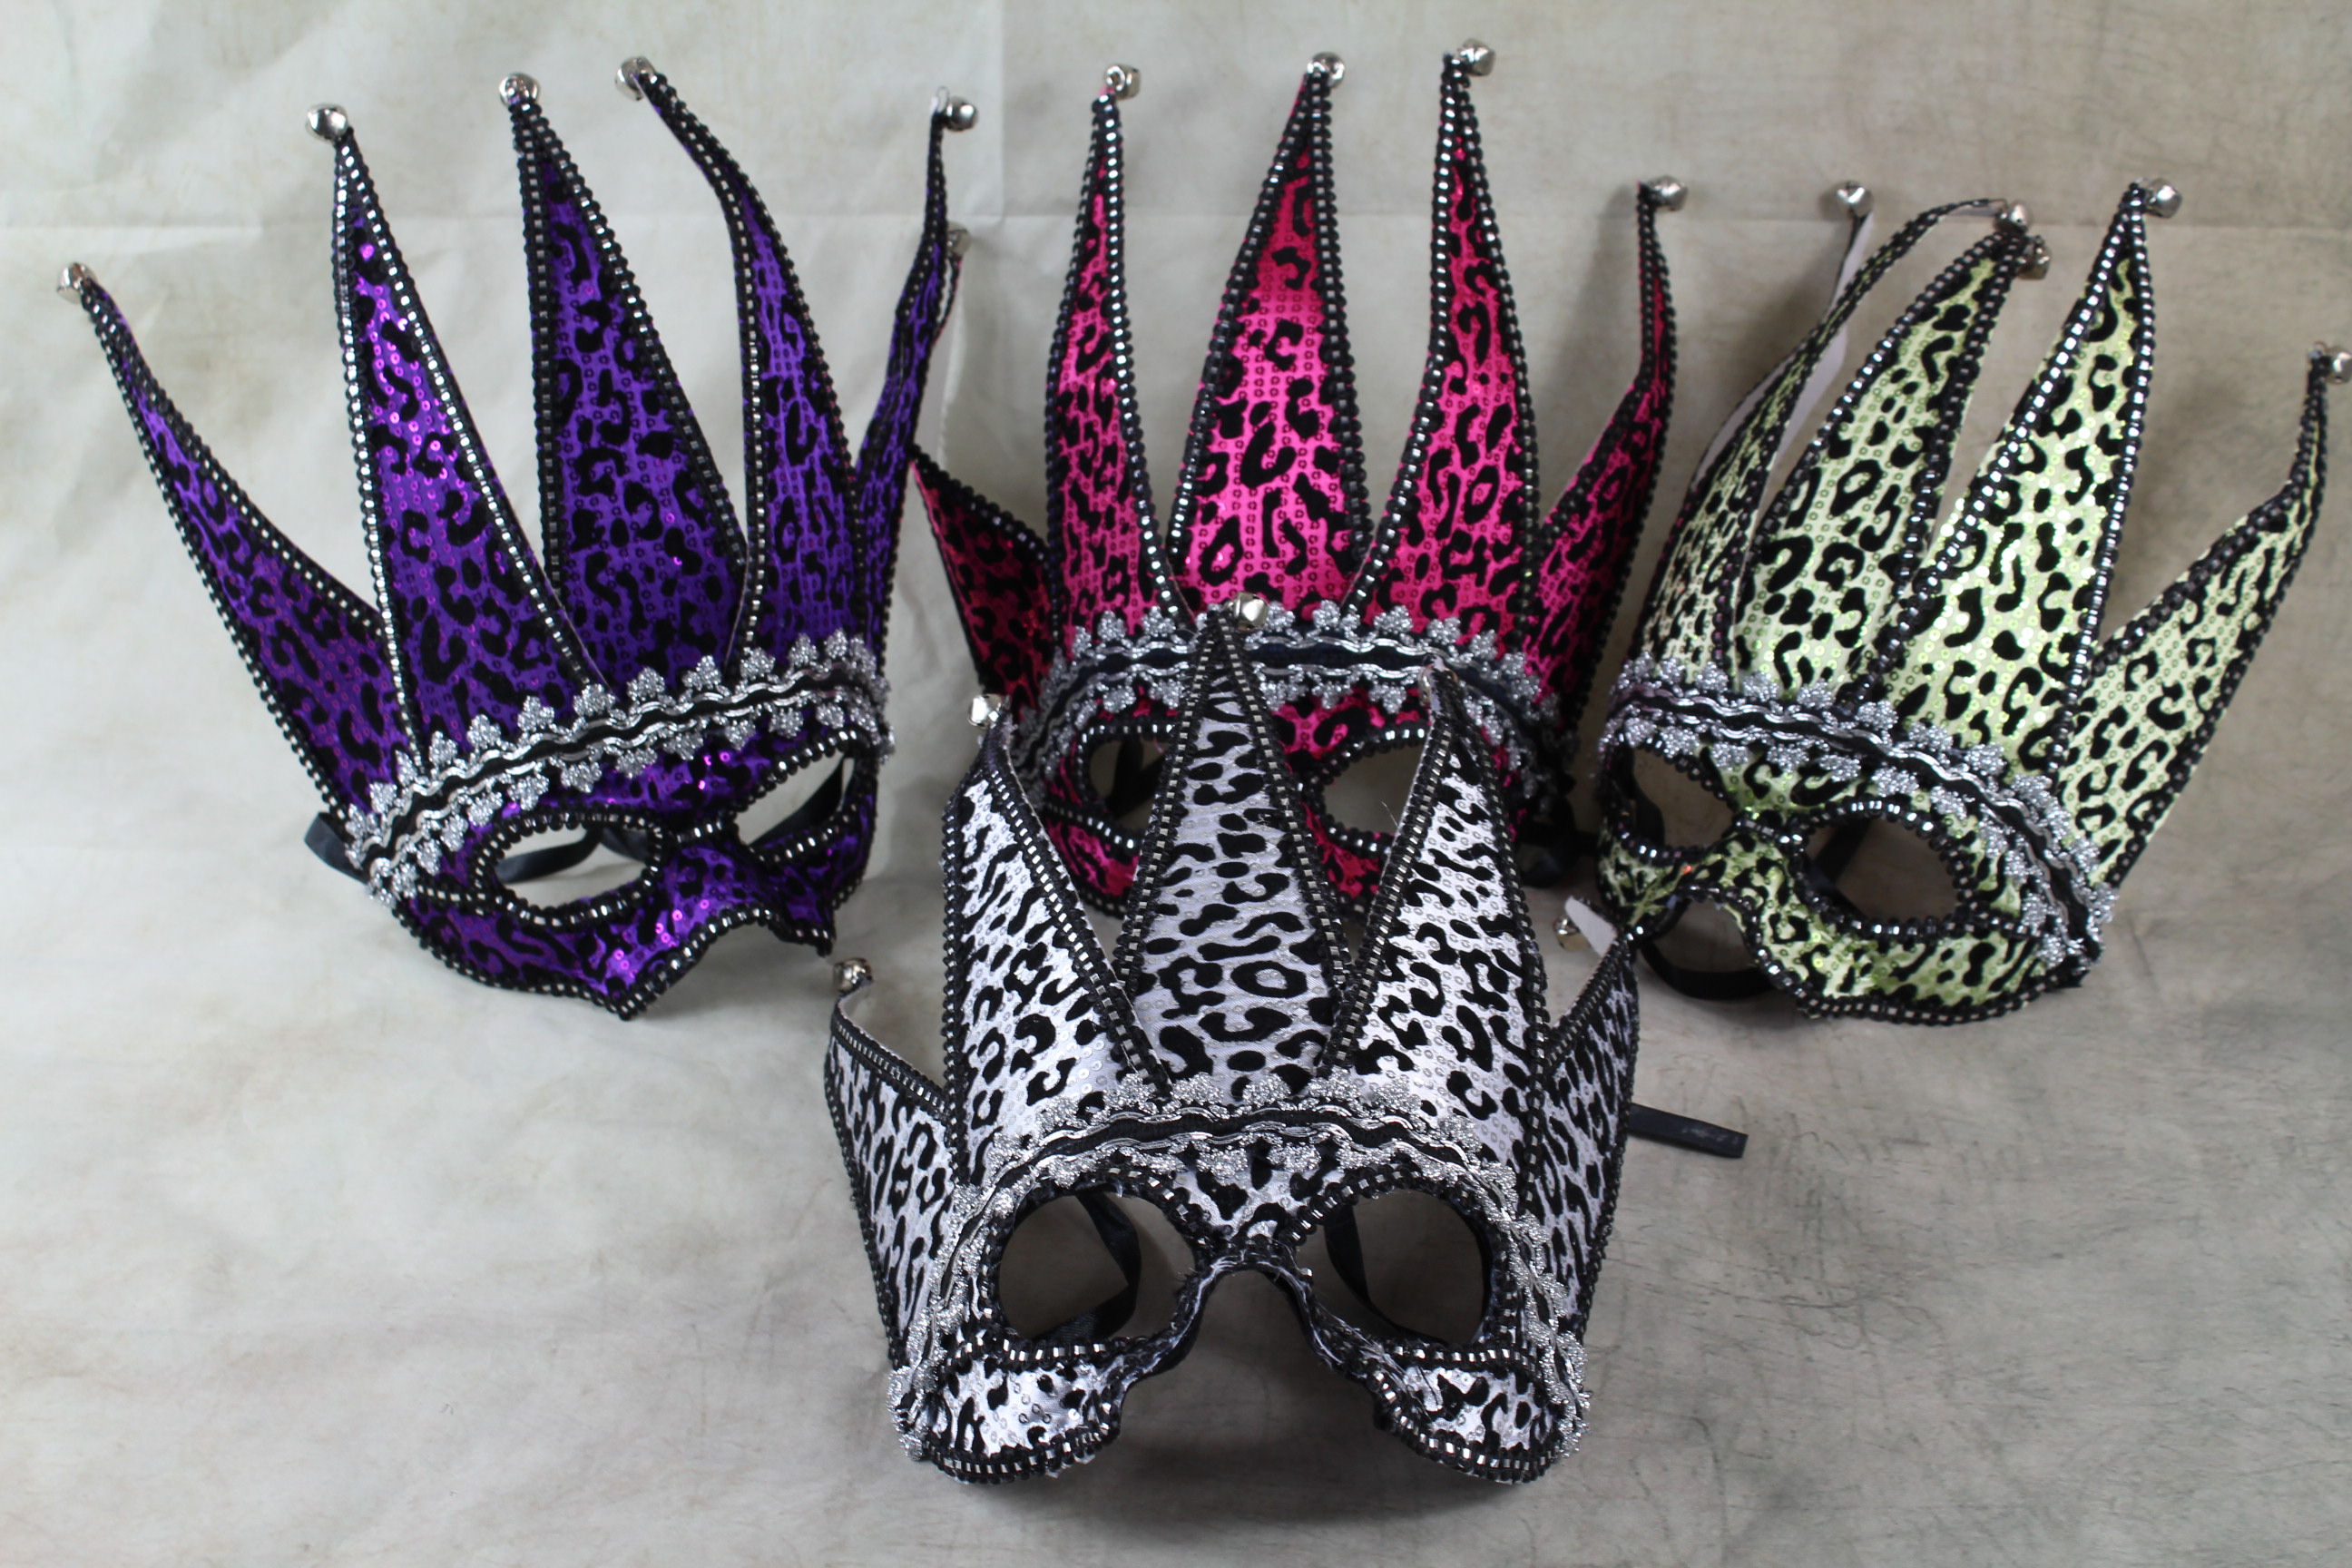 3 x Masquerade Jesters Masks - BUY 3 FOR THE PRICE OF 2!